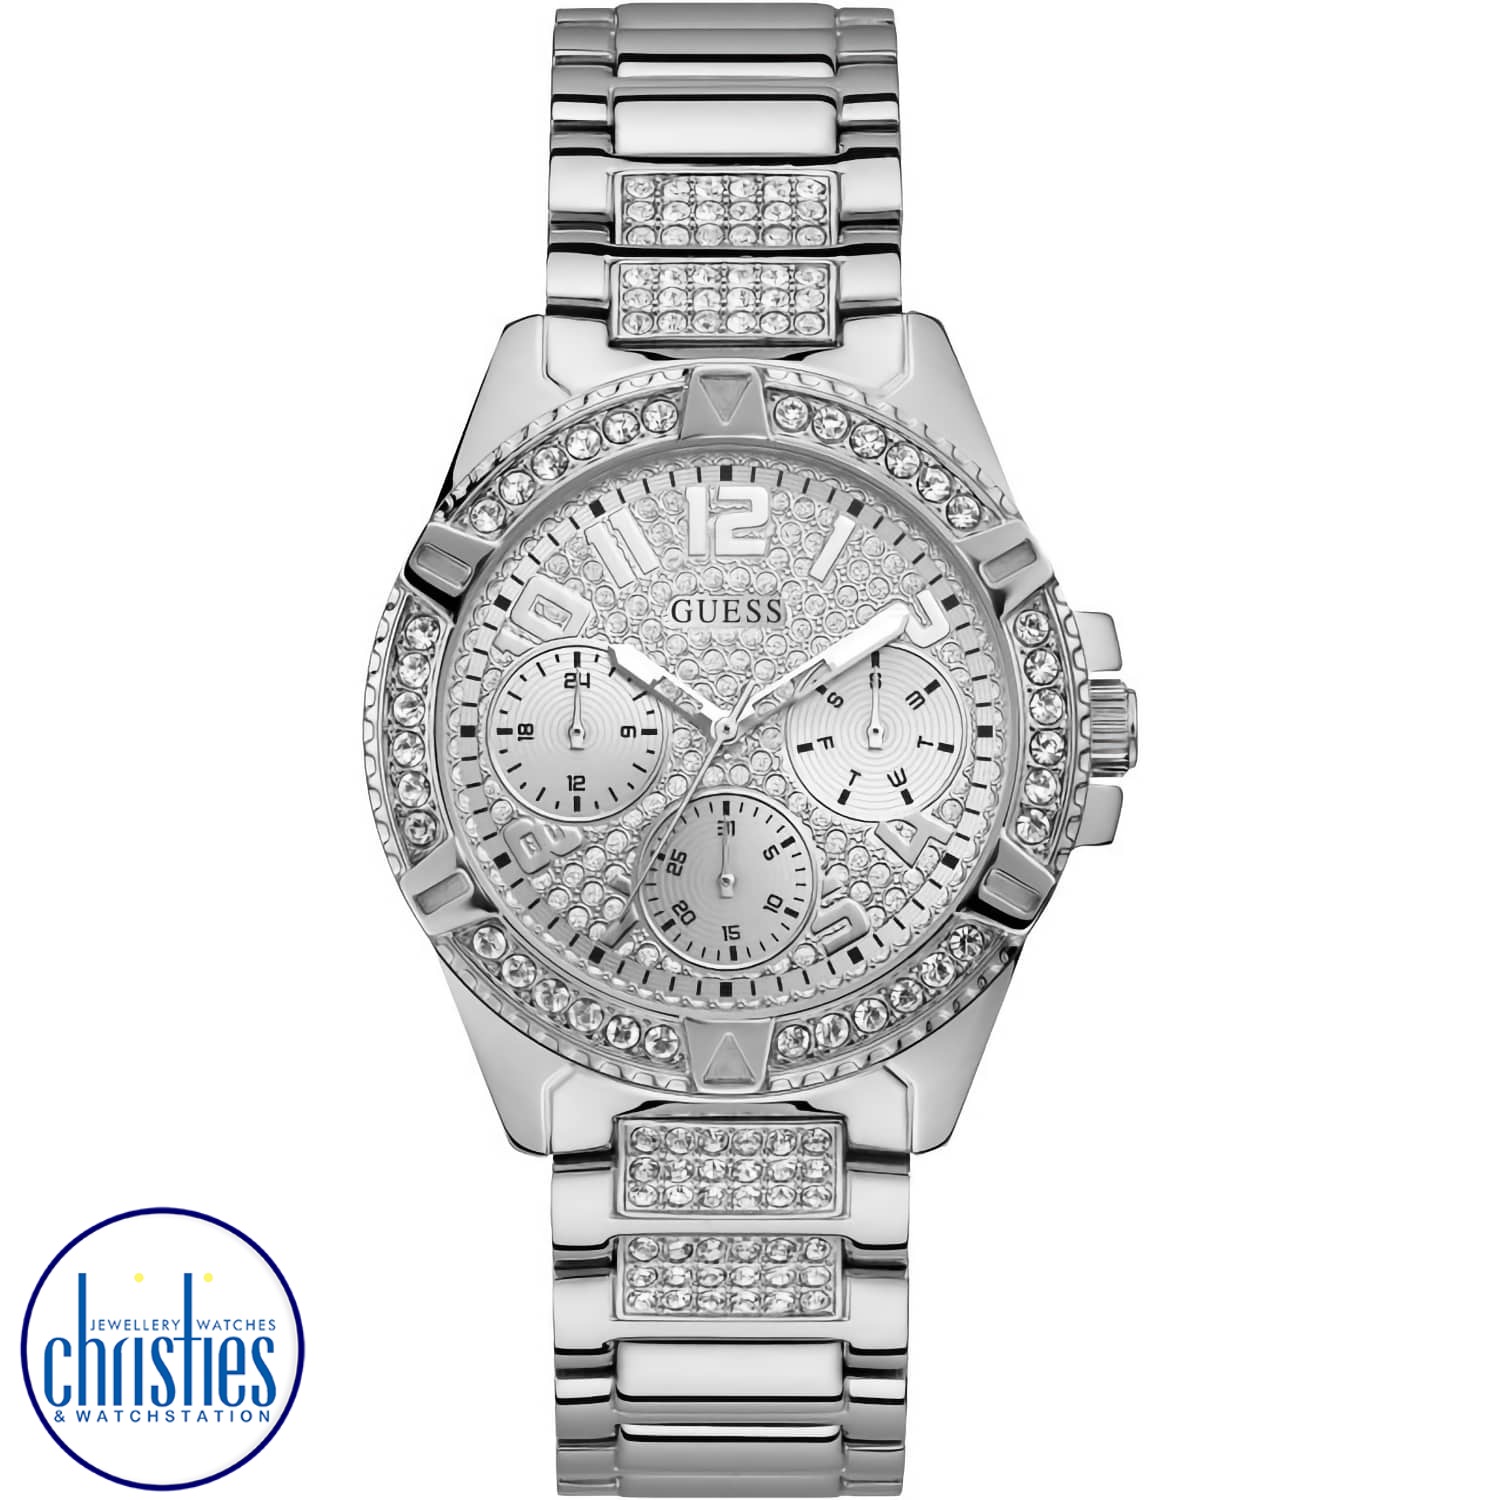 W1156L1 GUESS Lady Frontier Silver Watch. GUESS Ladies watch featuring a polished silver case with crystals, a sunray rose glitz multifunction dial and a polished stainless steel bracelet. guess watches women's sale